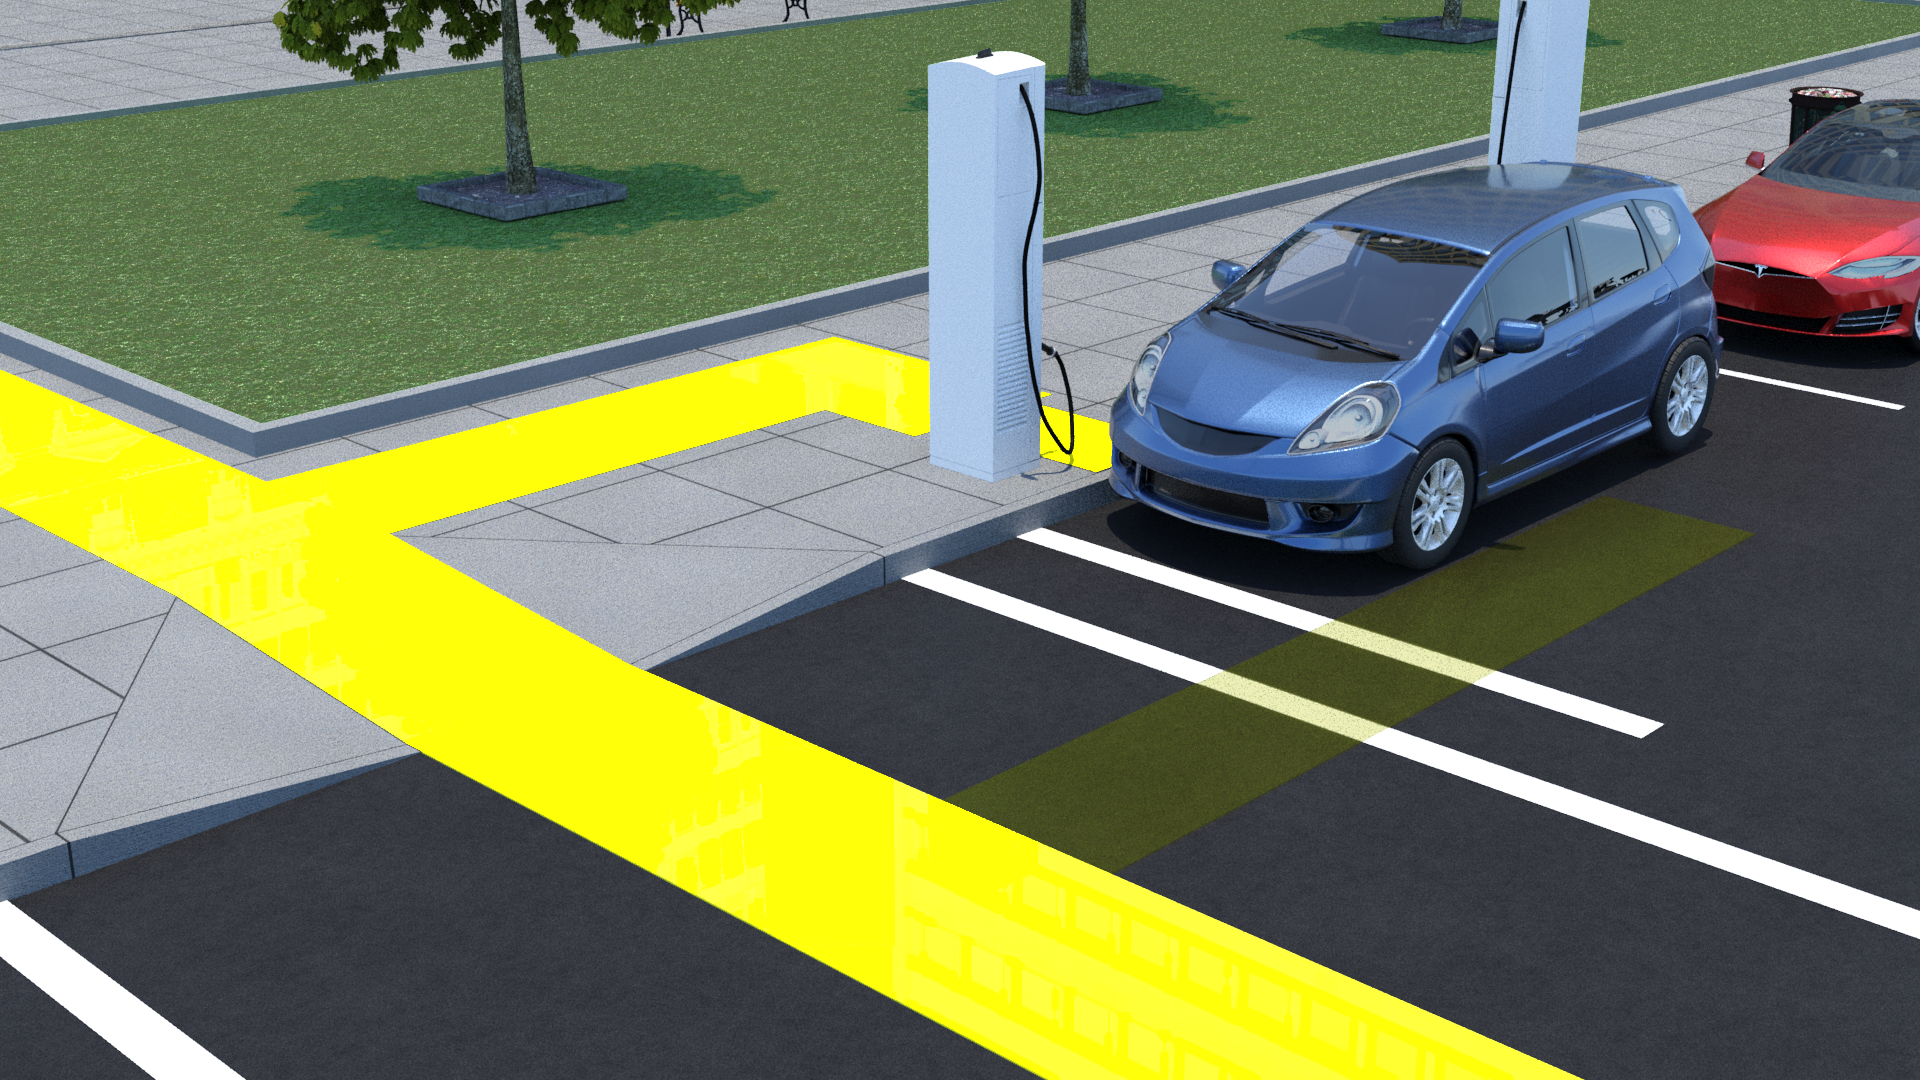 Blue car parked on the street at the end of the block. Sidewalk on the passenger side of vehicle with EV chargers installed on the sidewalk. Semi transparent yellow route indicates an accessible route from driver side door door to end of street, up the curb ramp, and back to the charger. Yellow rectangle indicates clear floor space at the charger.